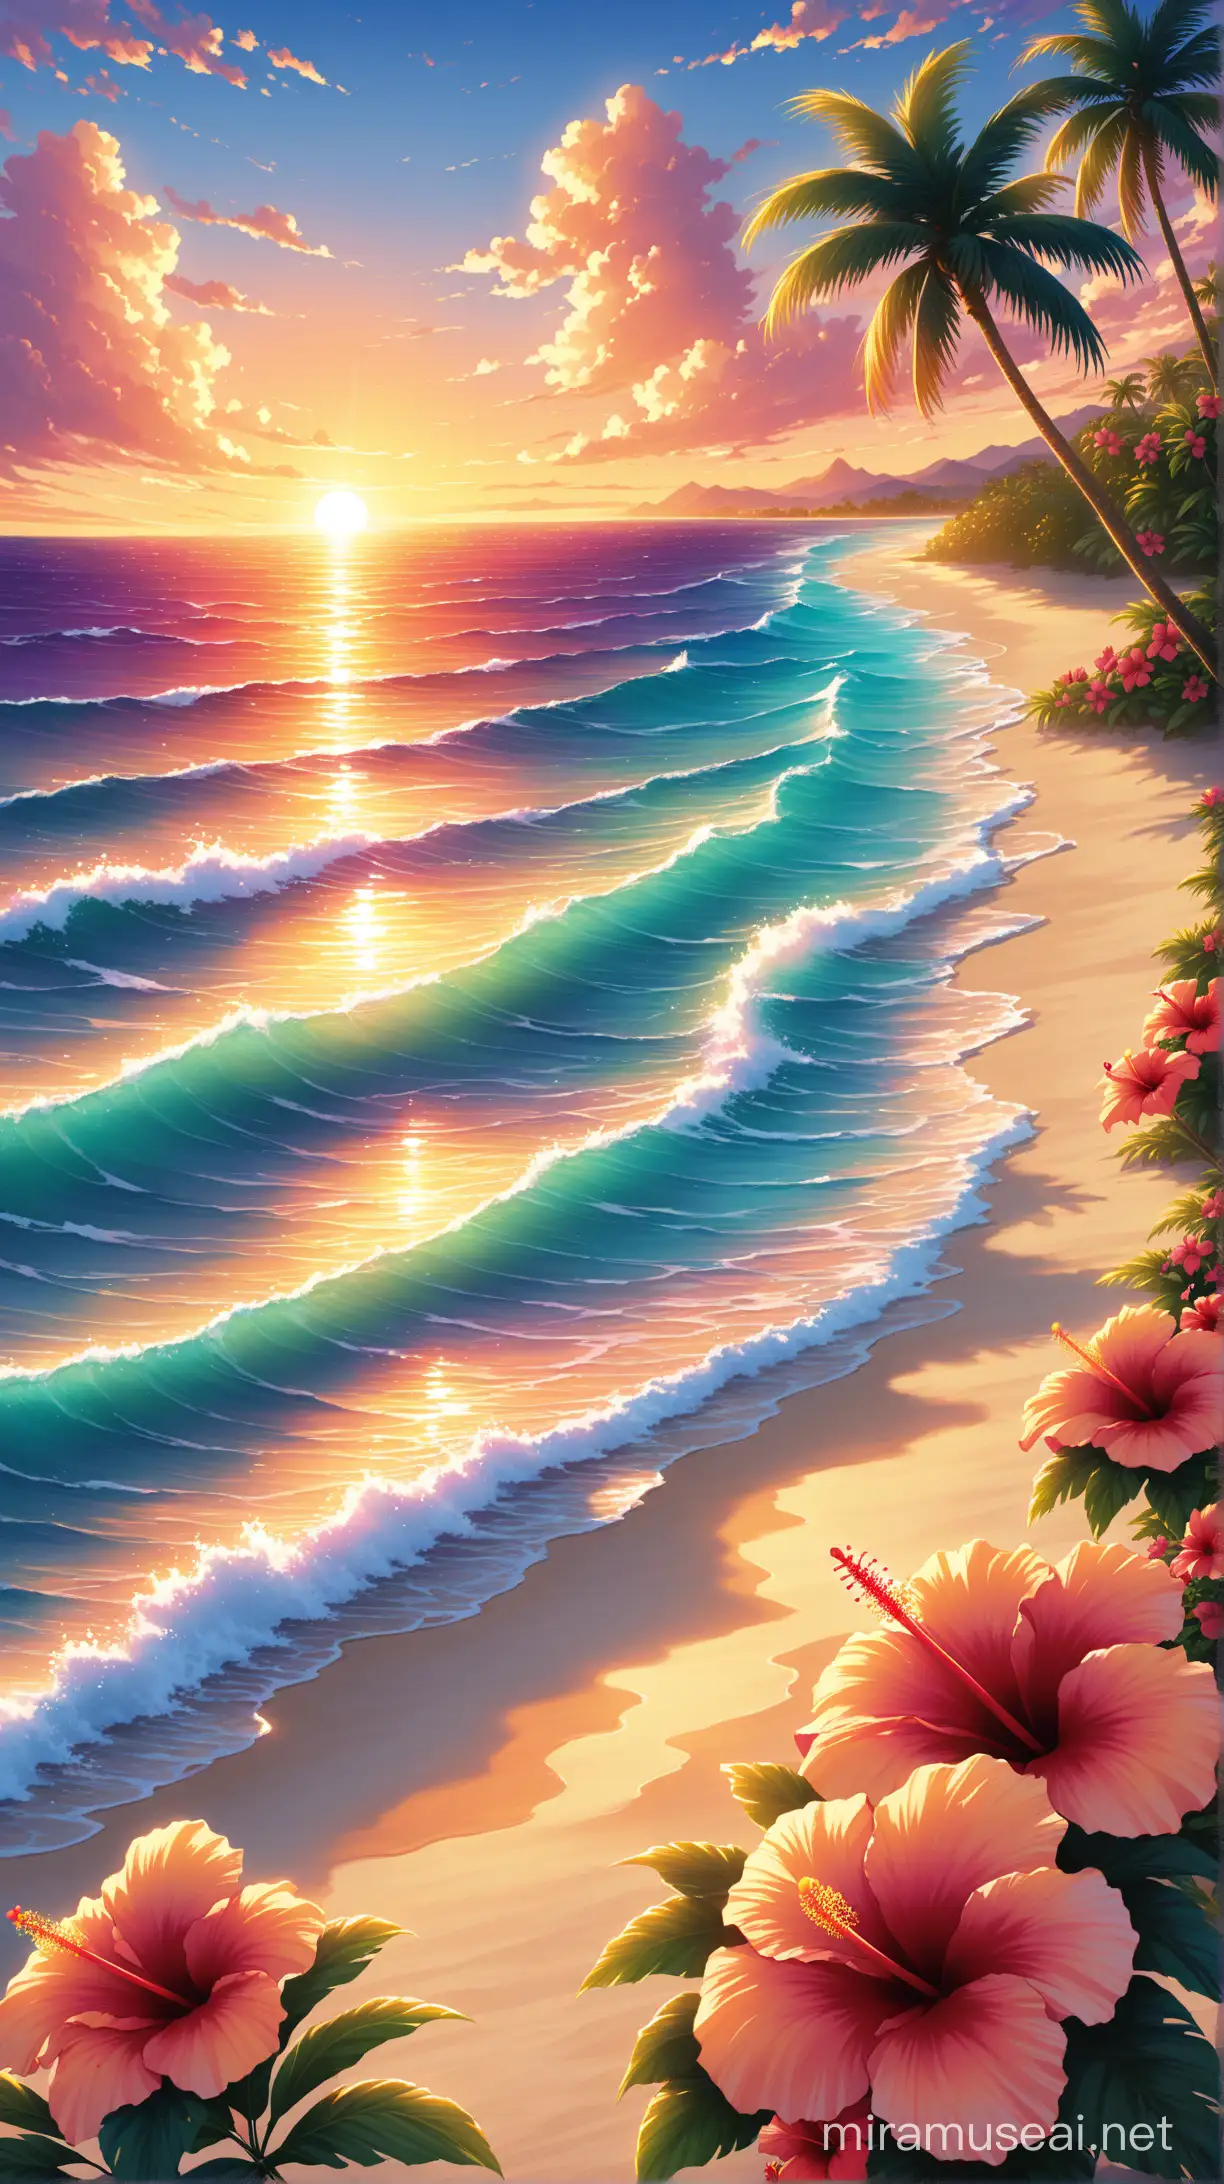 Tropical Sunset Ocean Waves and Hibiscus Blooms